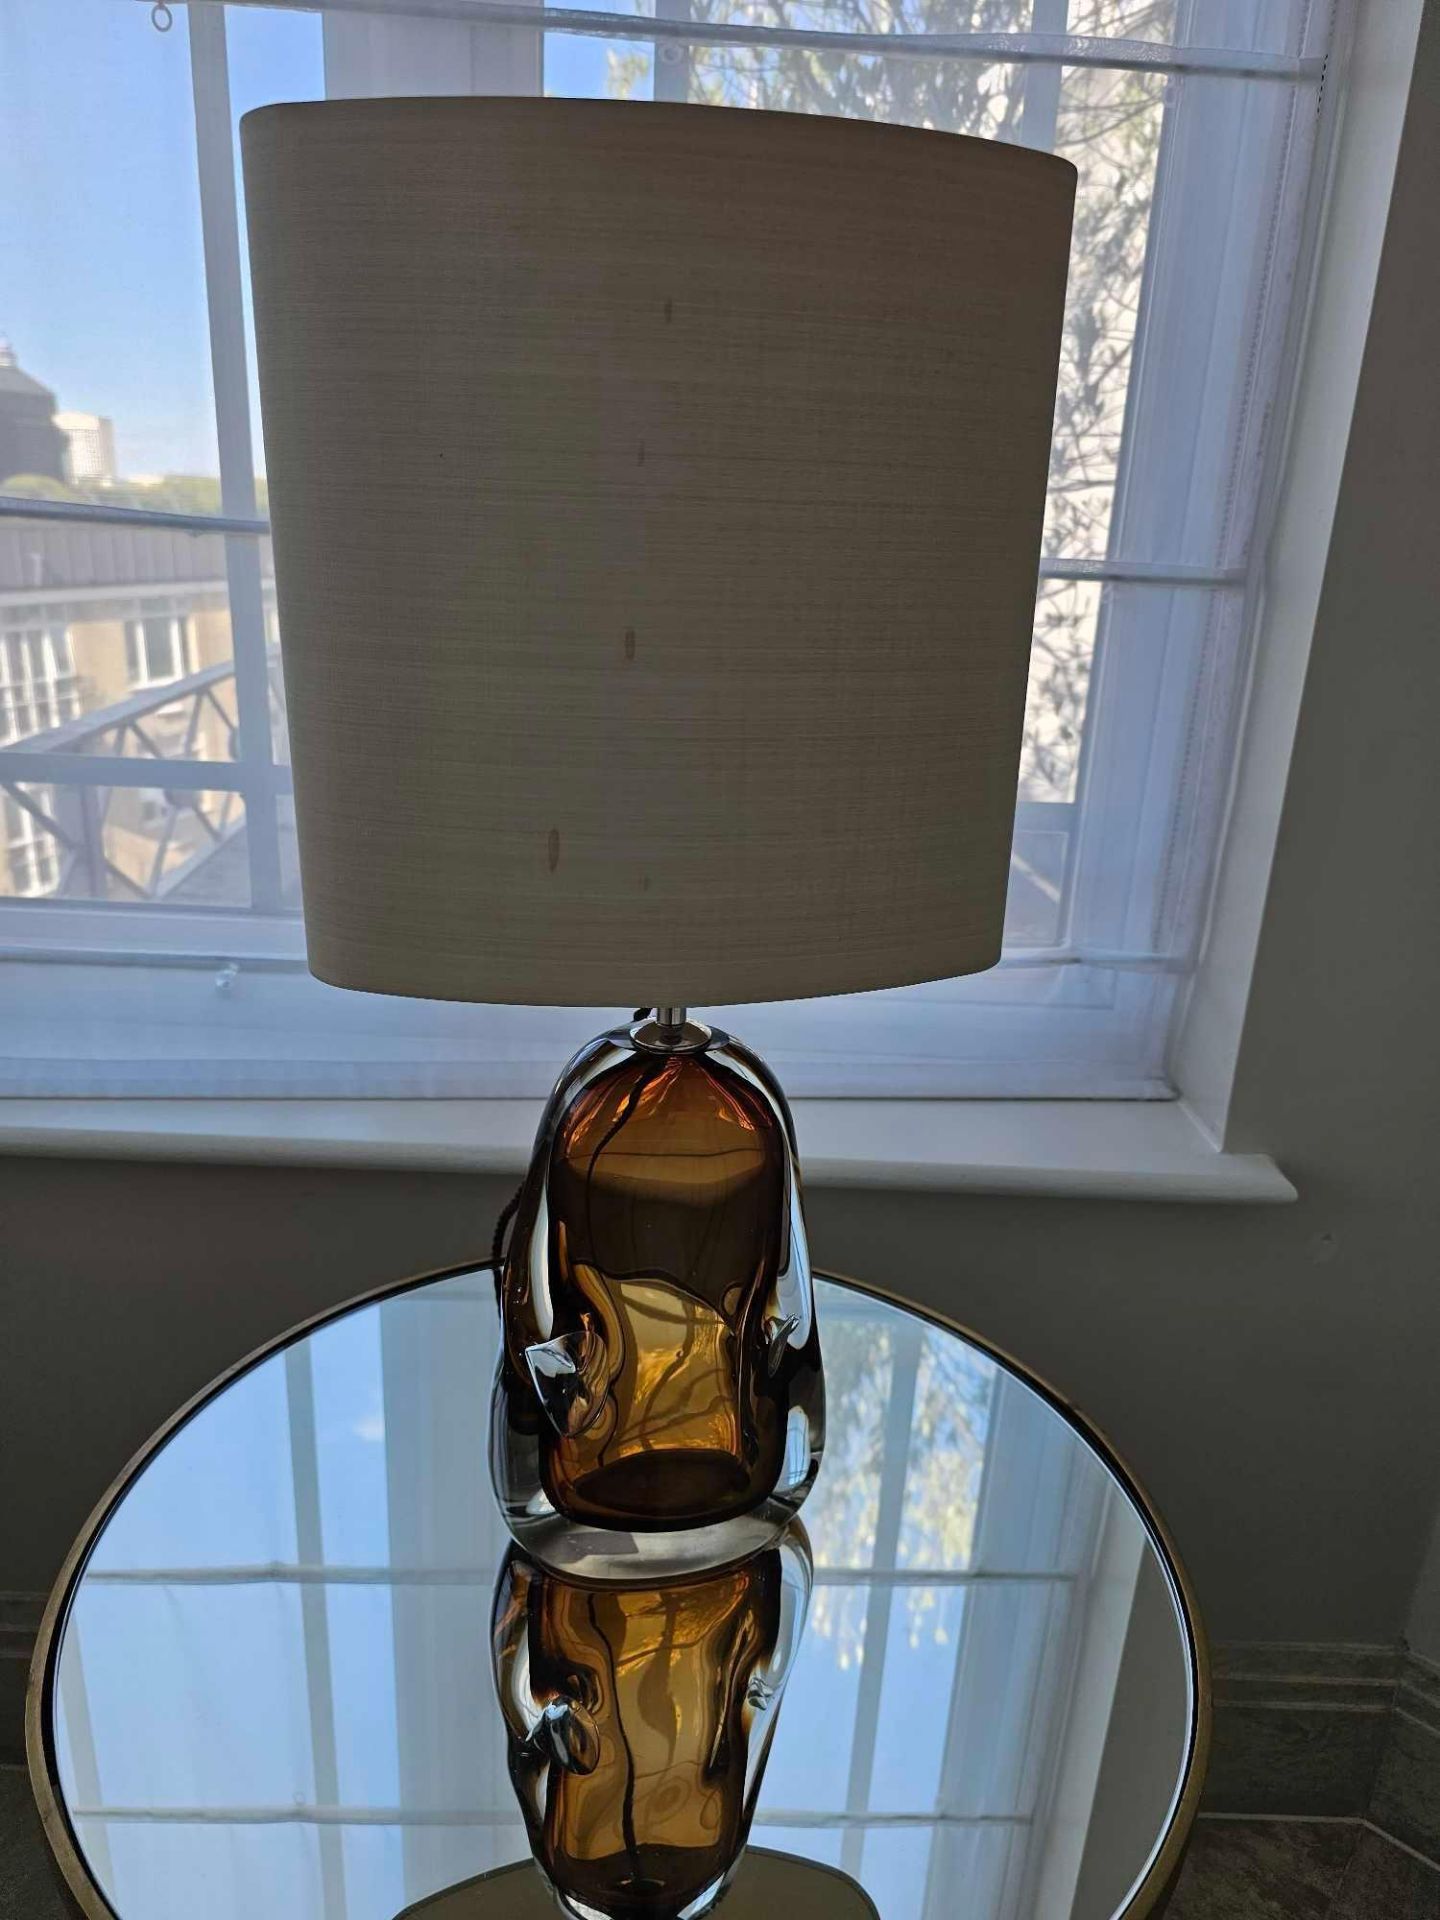 Porta Romana Perfume Bottle Lamp GLB26  blown glass and accented nickel plated fittings, this - Image 2 of 3